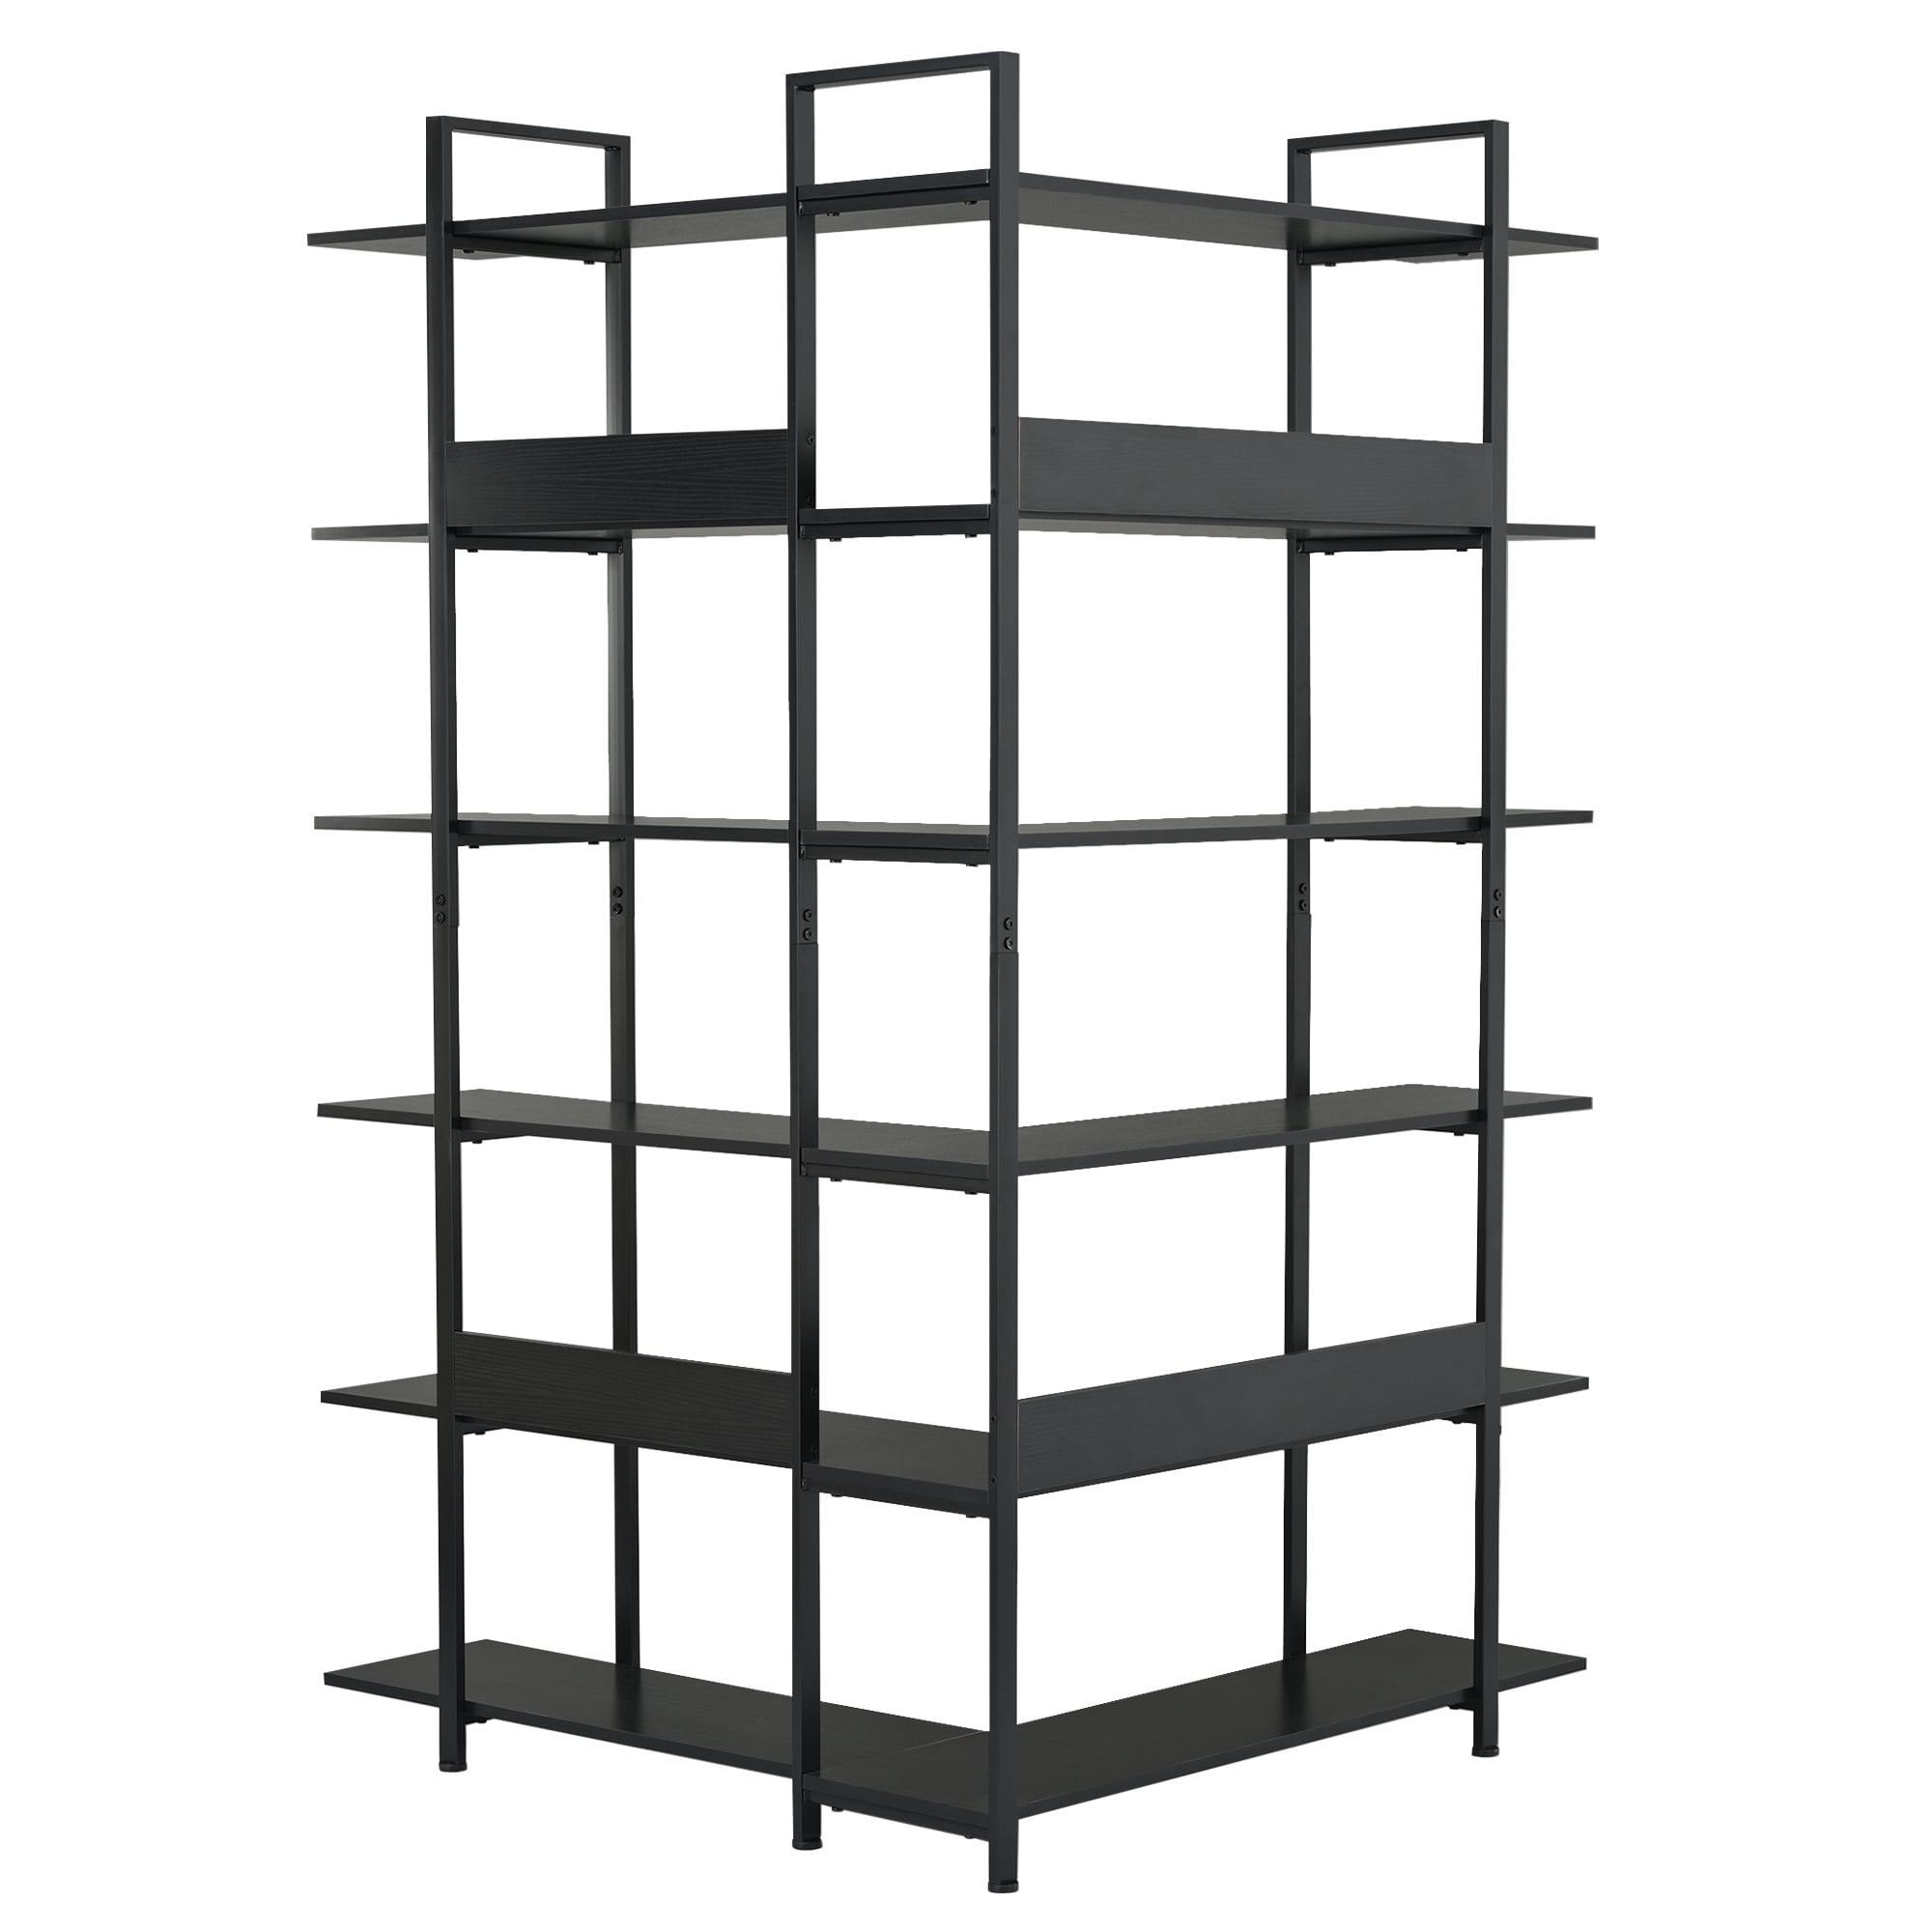 Dropship 74.8 Inch Bookshelf L-shape MDF Boards Stainless Steel Frame  Corner 6-tier Shelves Adjustable Foot Pads, Black to Sell Online at a Lower  Price